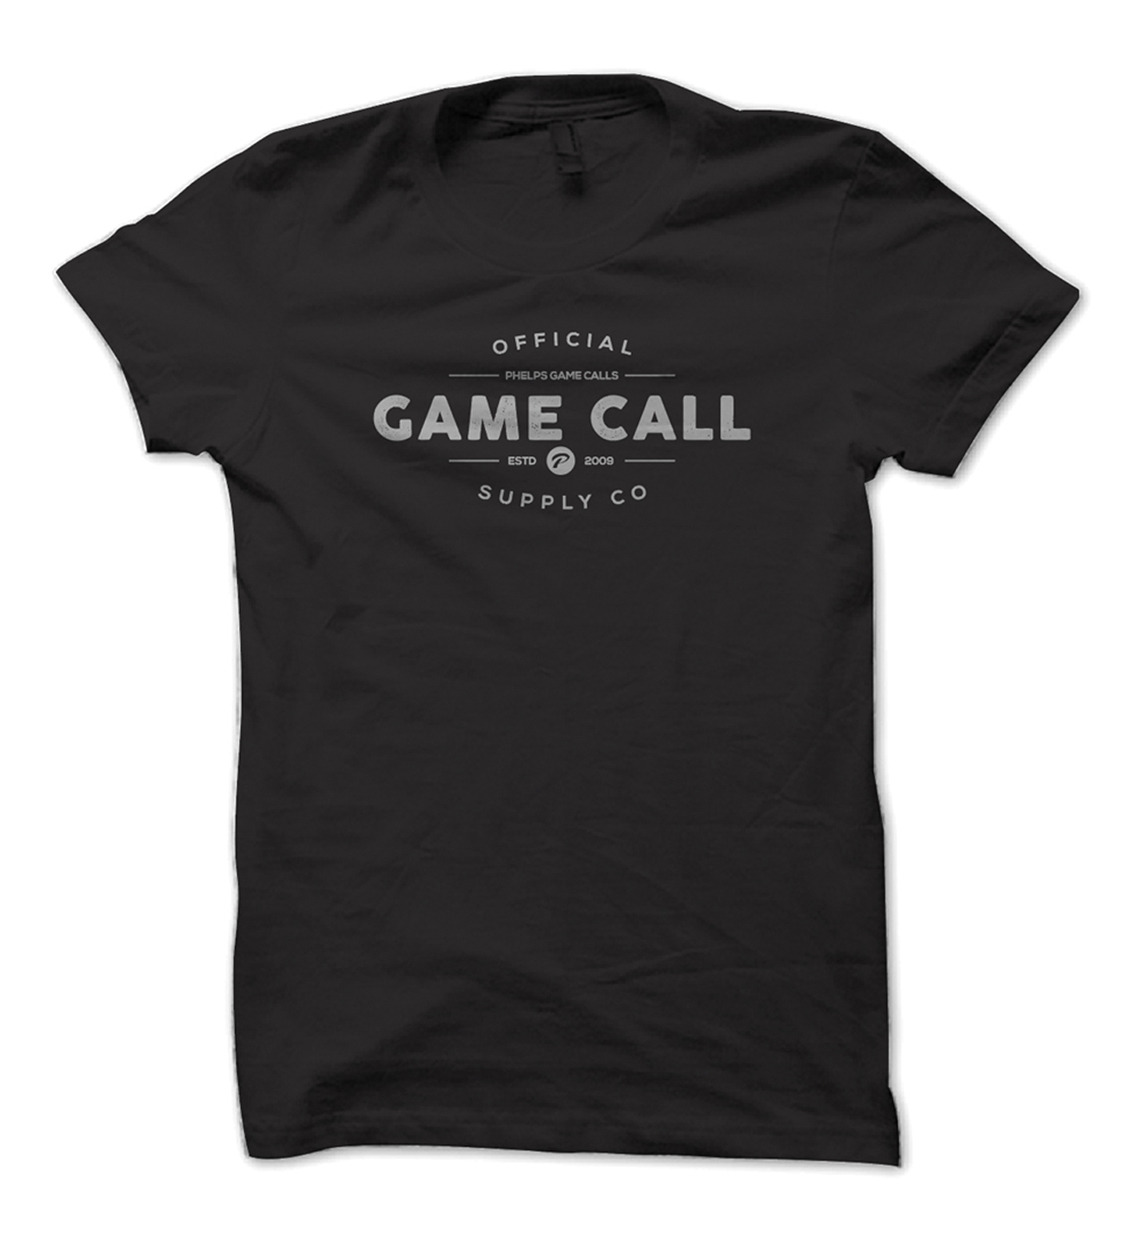 Phelps Game Calls Official Supply Co Tee Design